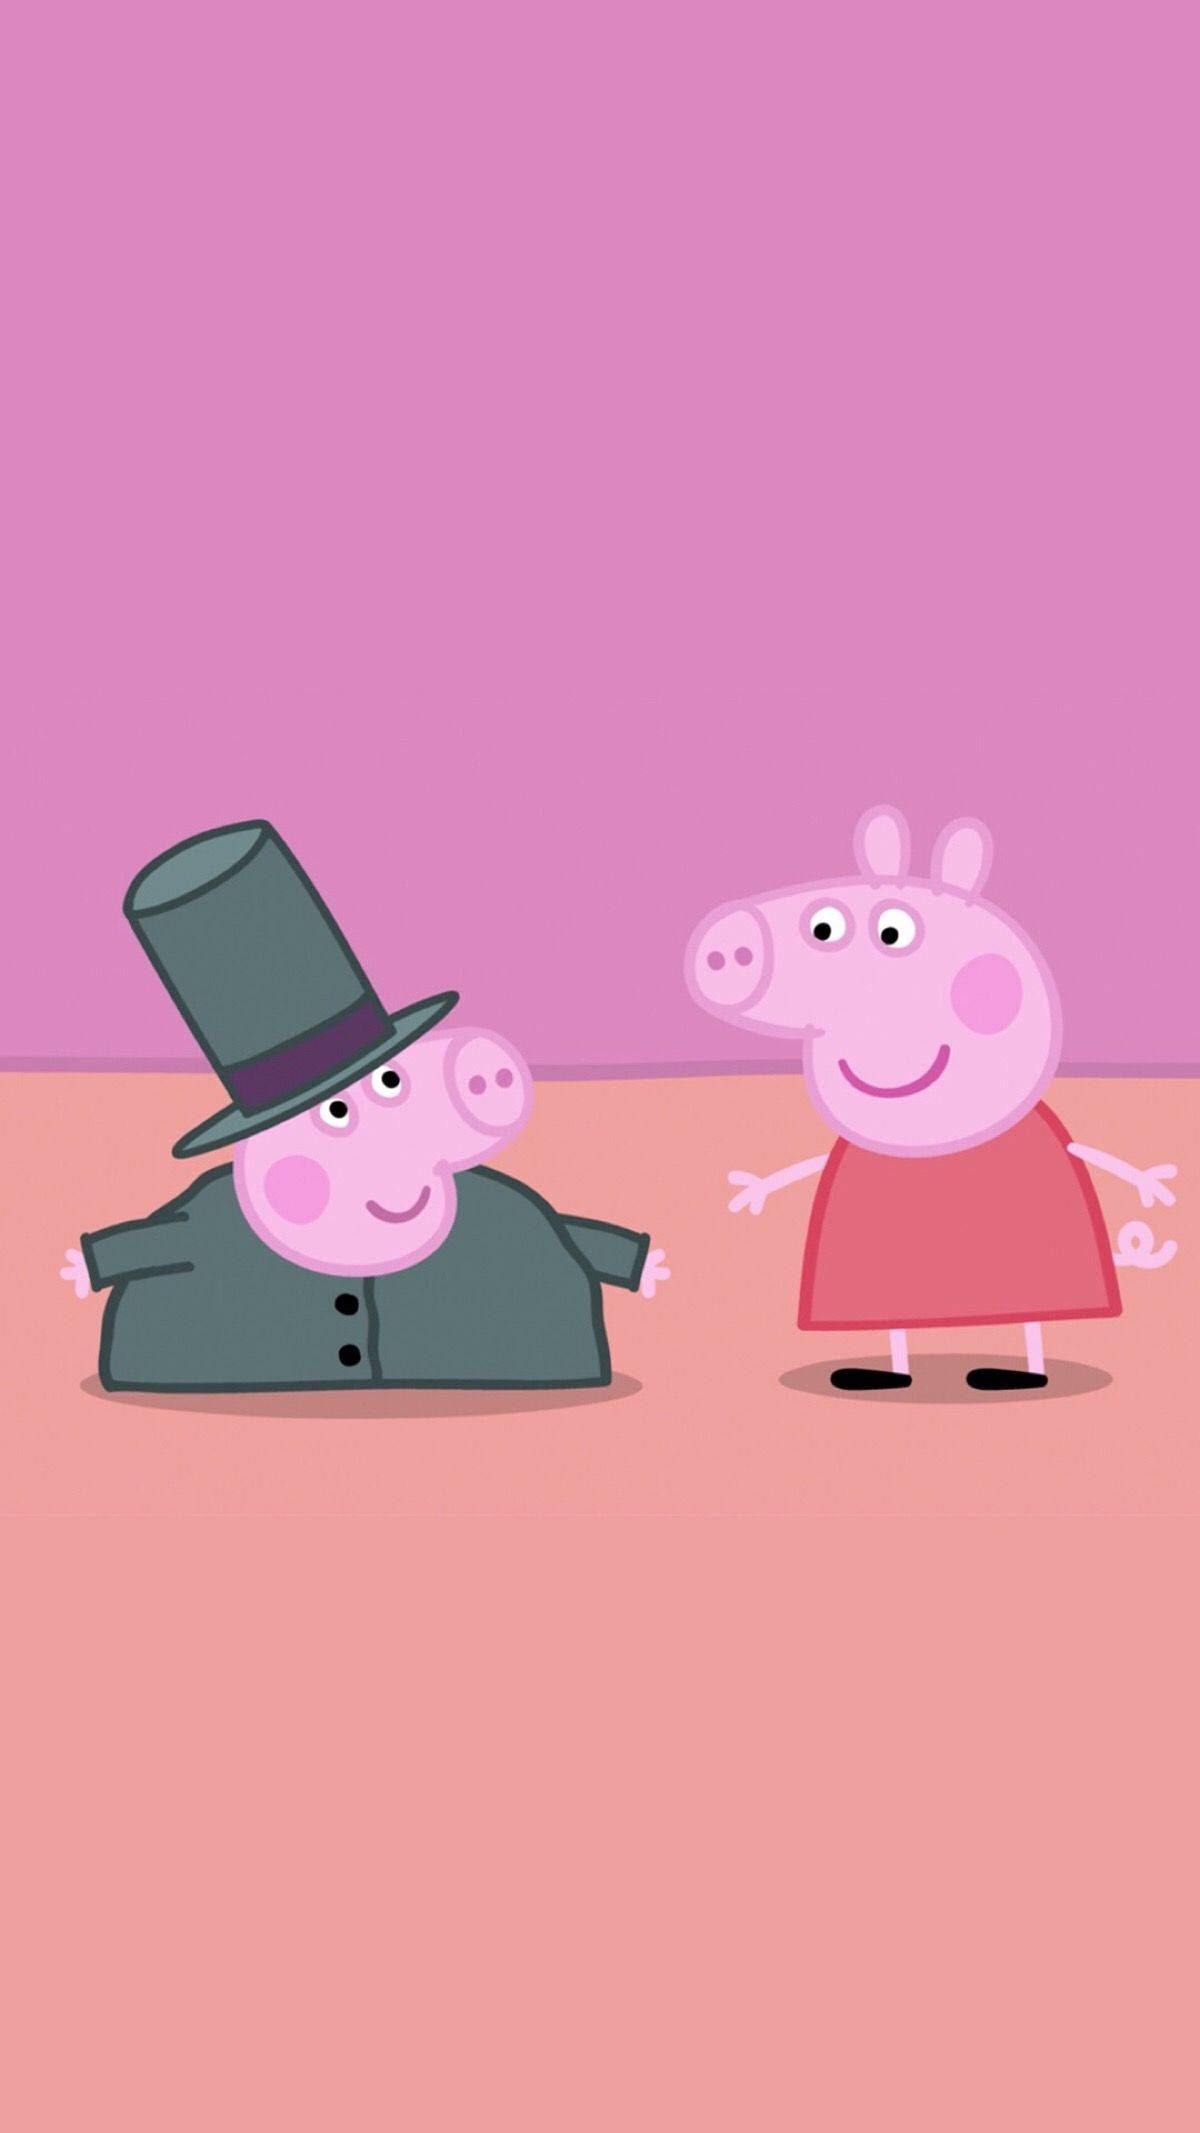 Pepa and peppa are standing in front of each other - George Pig, Peppa Pig